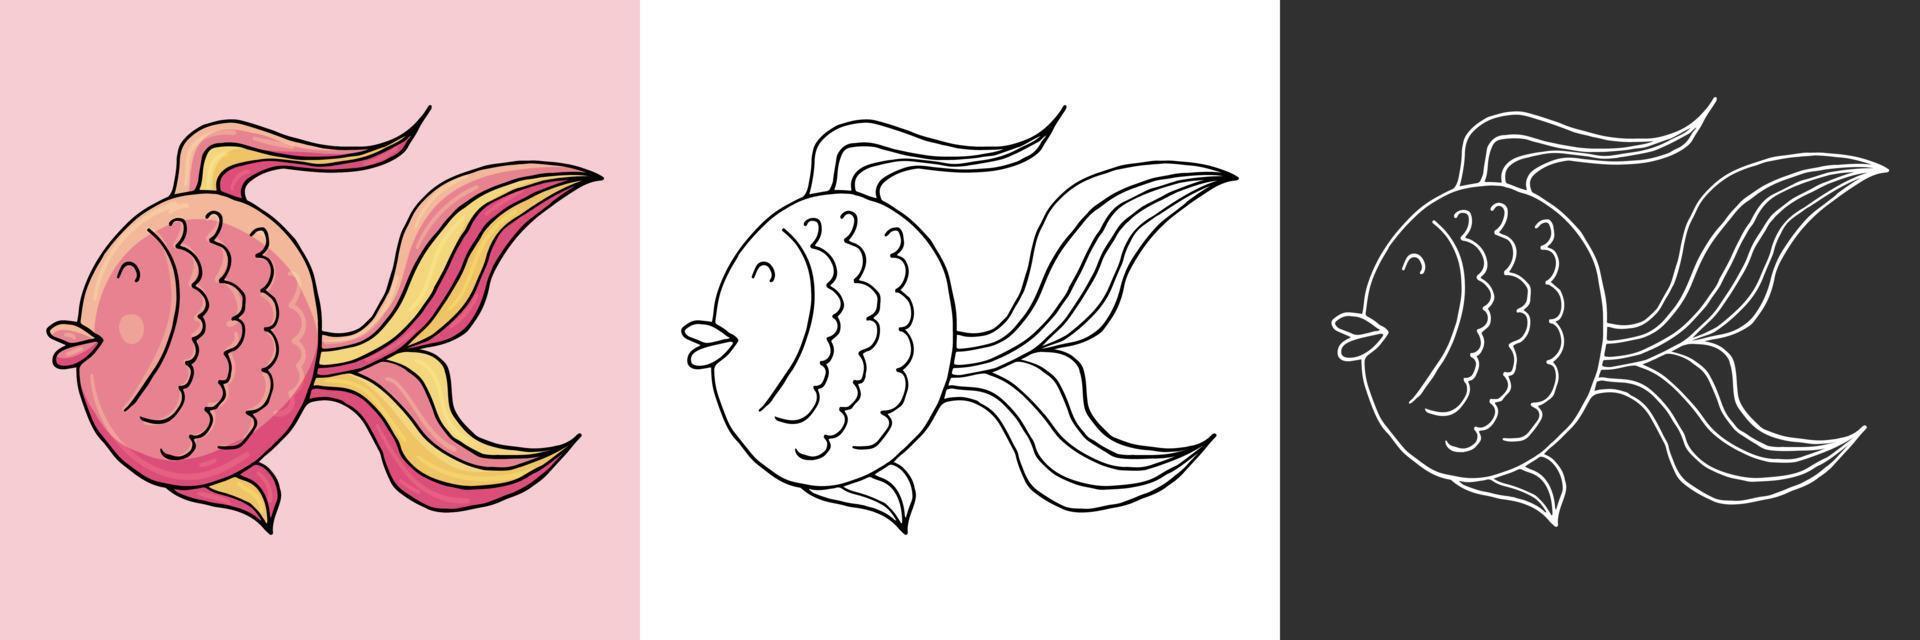 Icon in hand draw style. Liner illustration. Collection of drawings on the marine theme vector